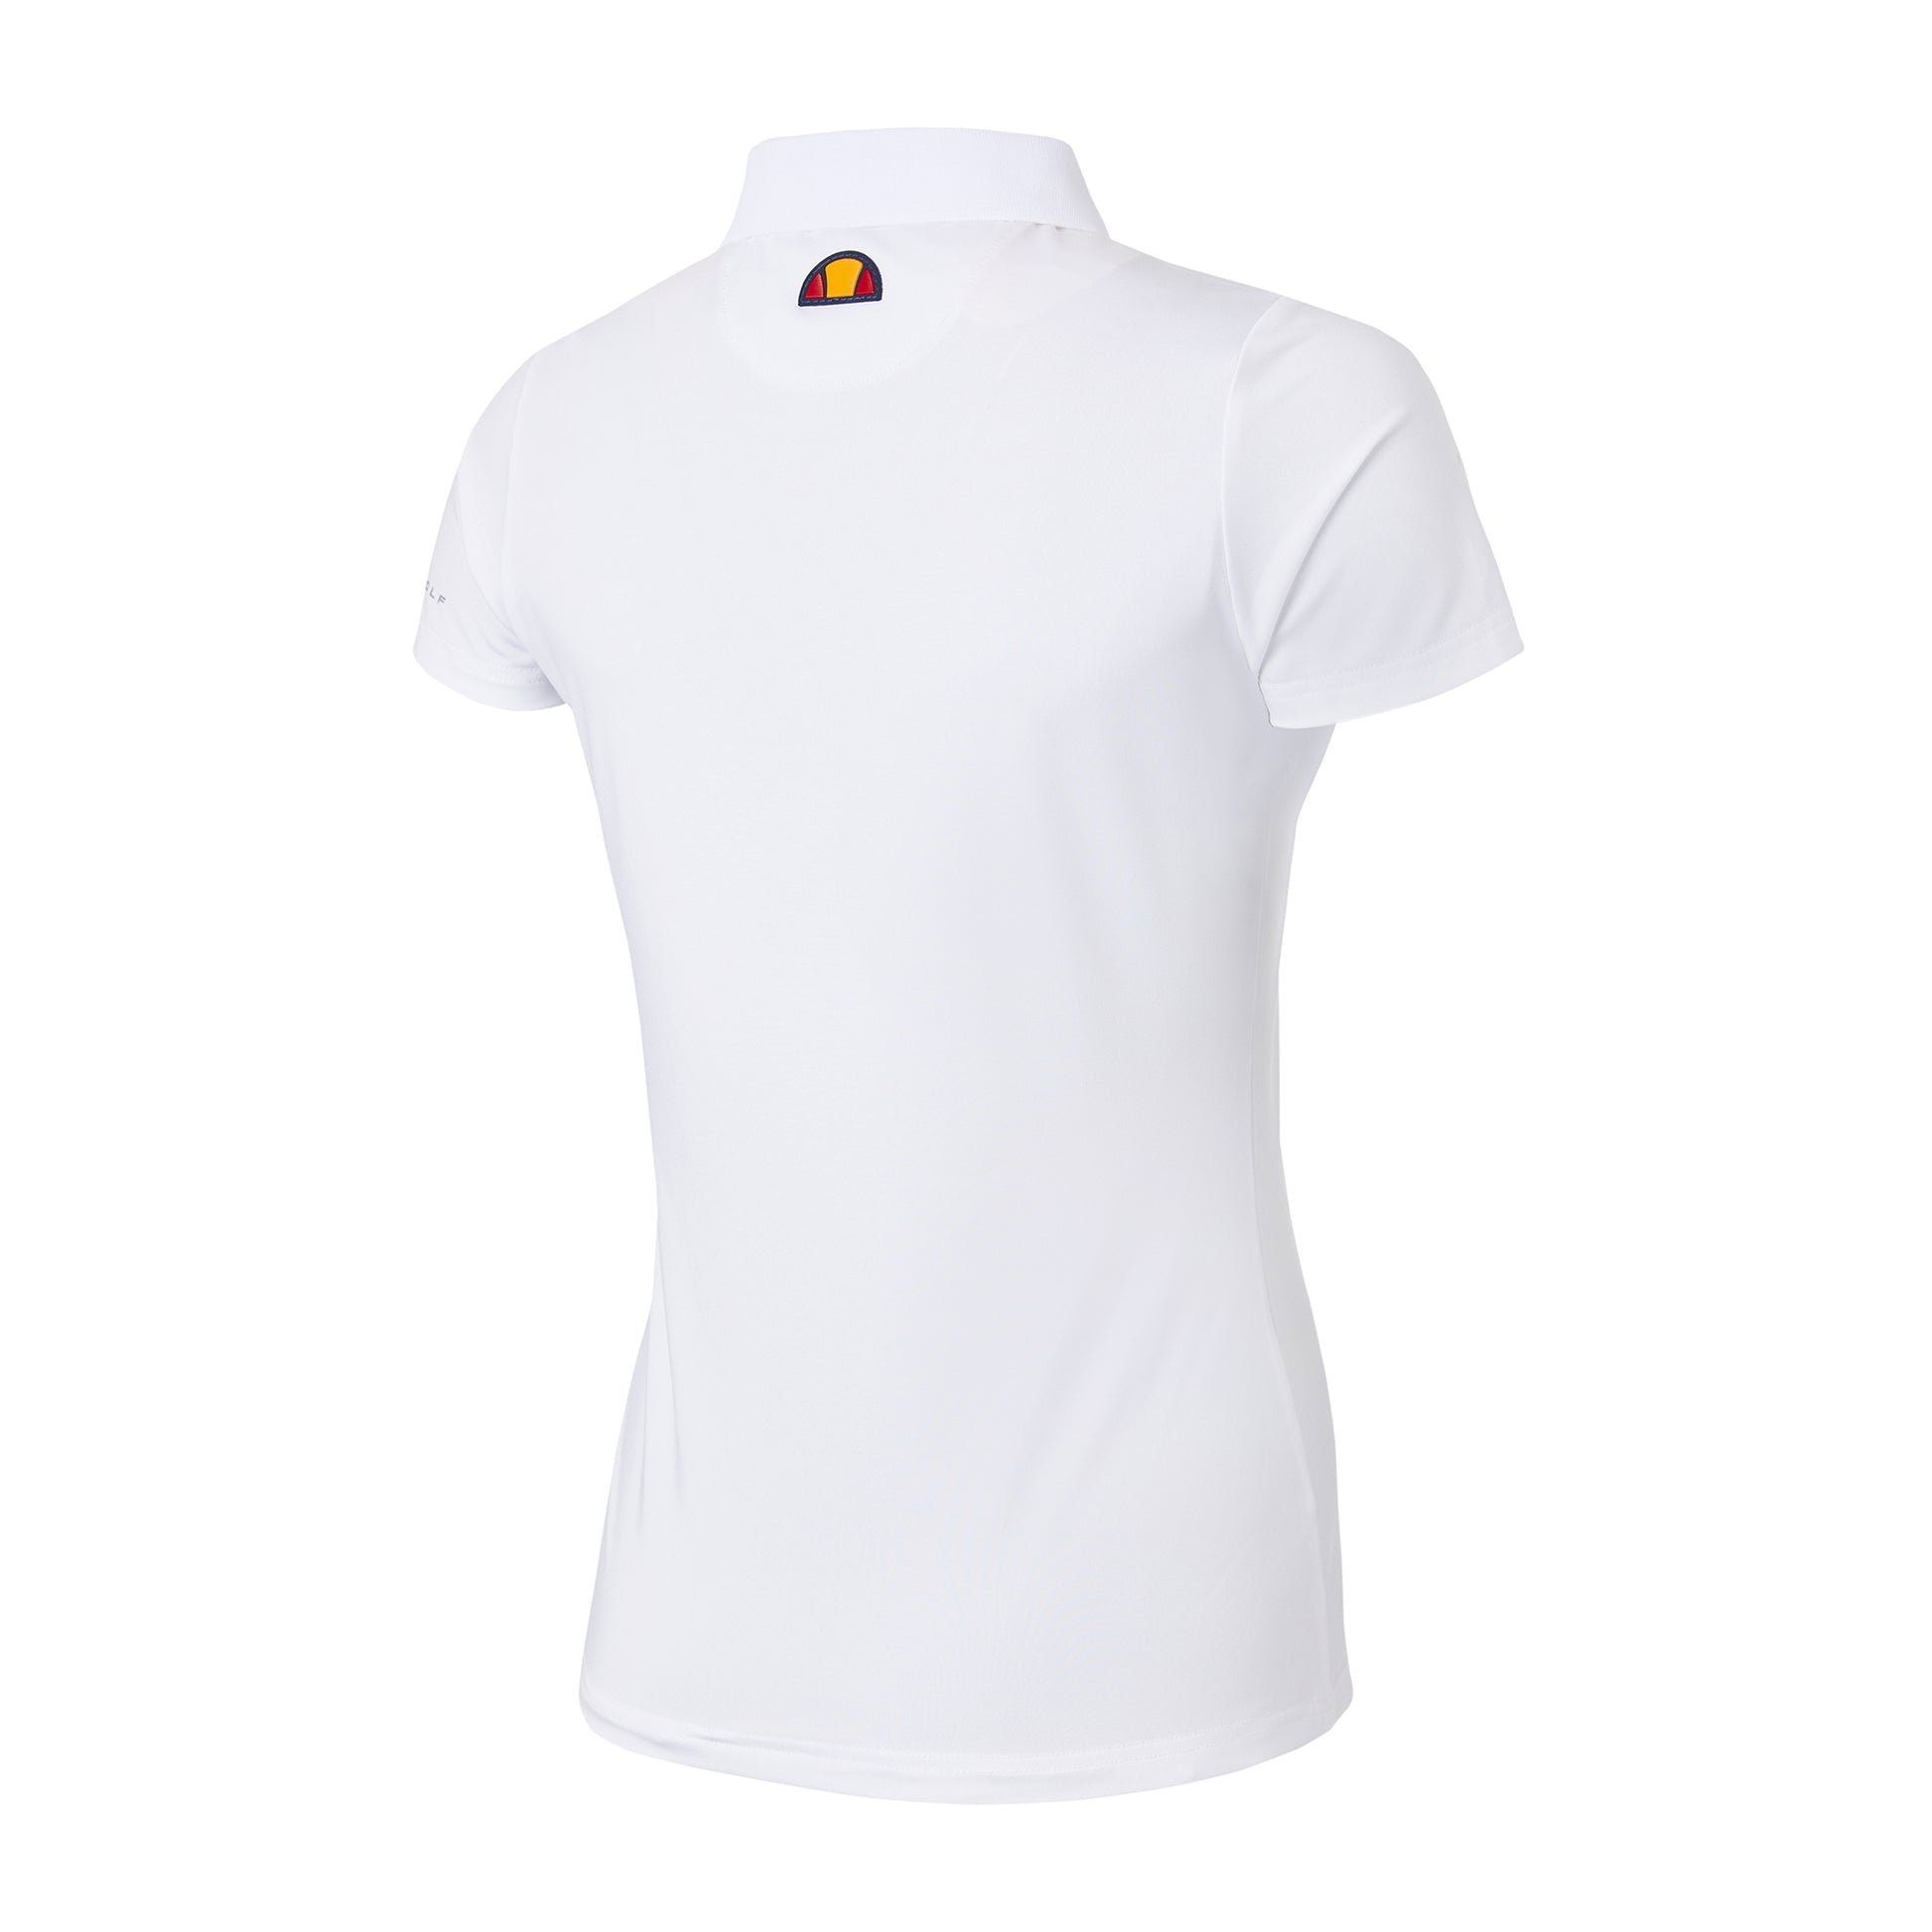 Ellesse Women's White Short Sleeve Polo with Zip-Neck